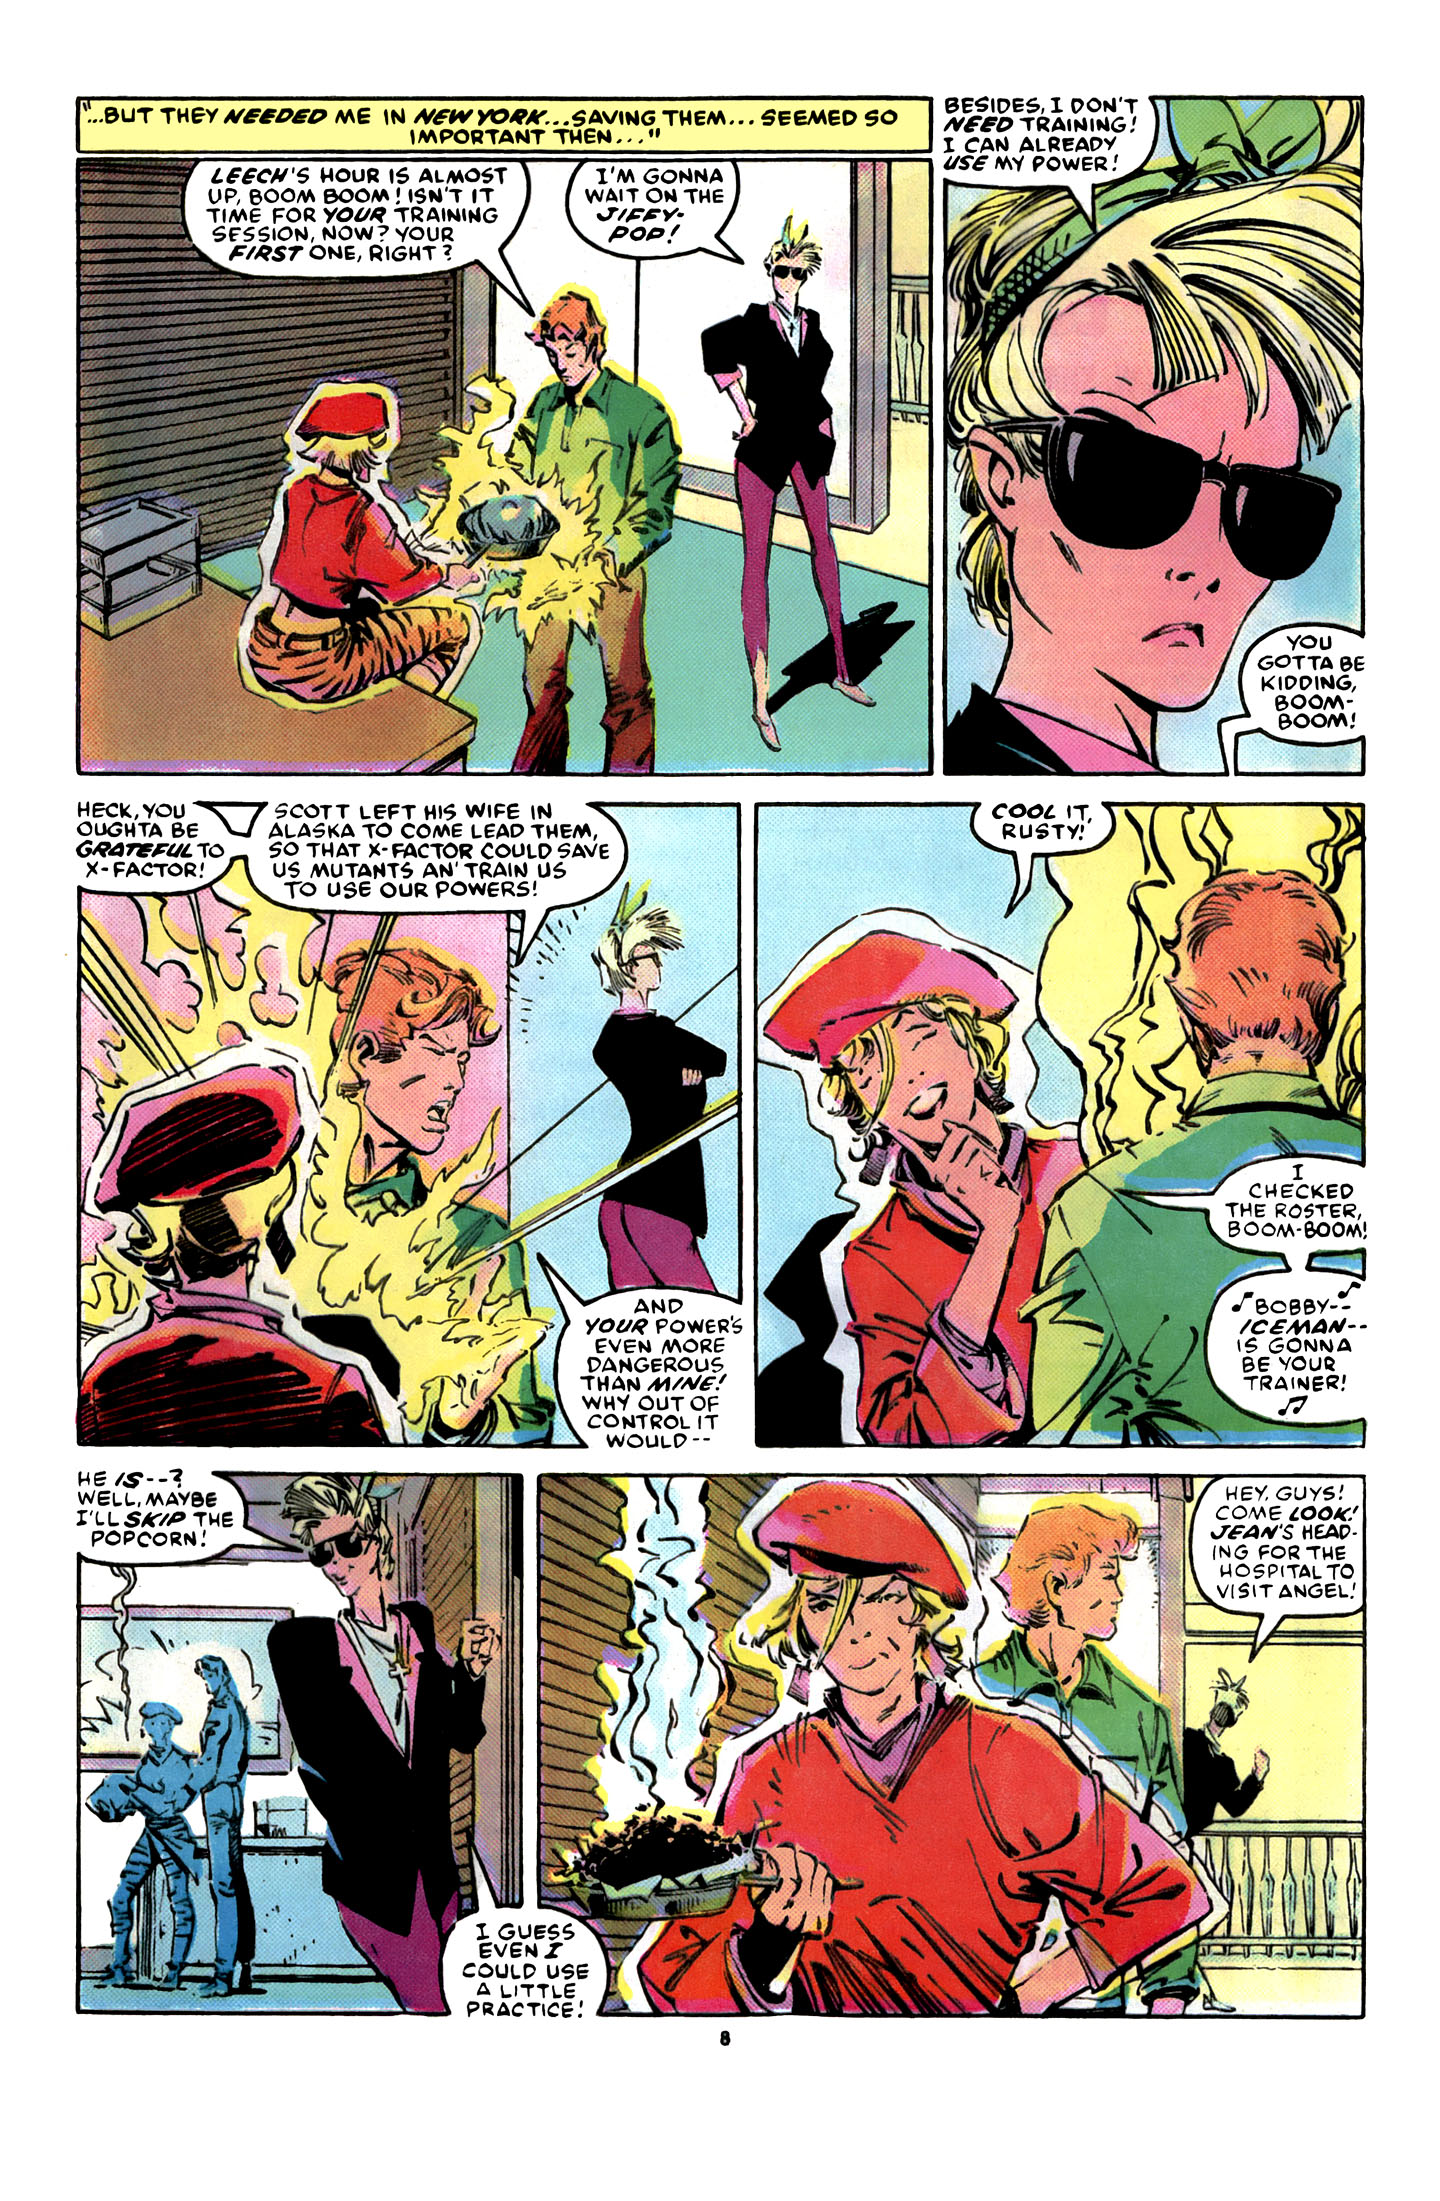 X-Factor (1986) 14 Page 8